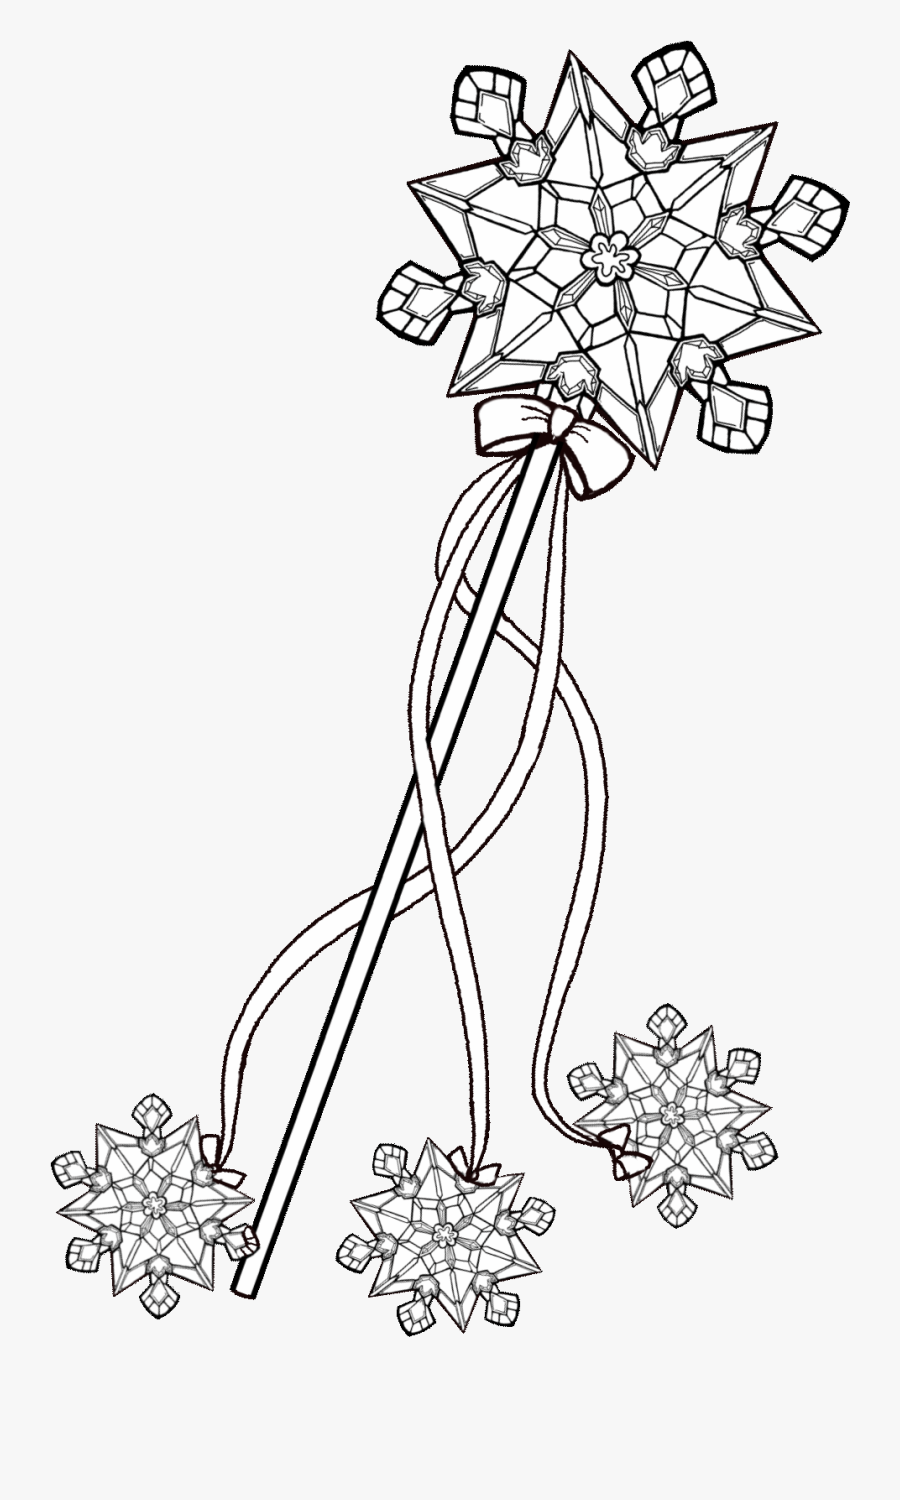 1000 Images About Coloring On Pinterest - Snowflake Coloring Pages, Transparent Clipart